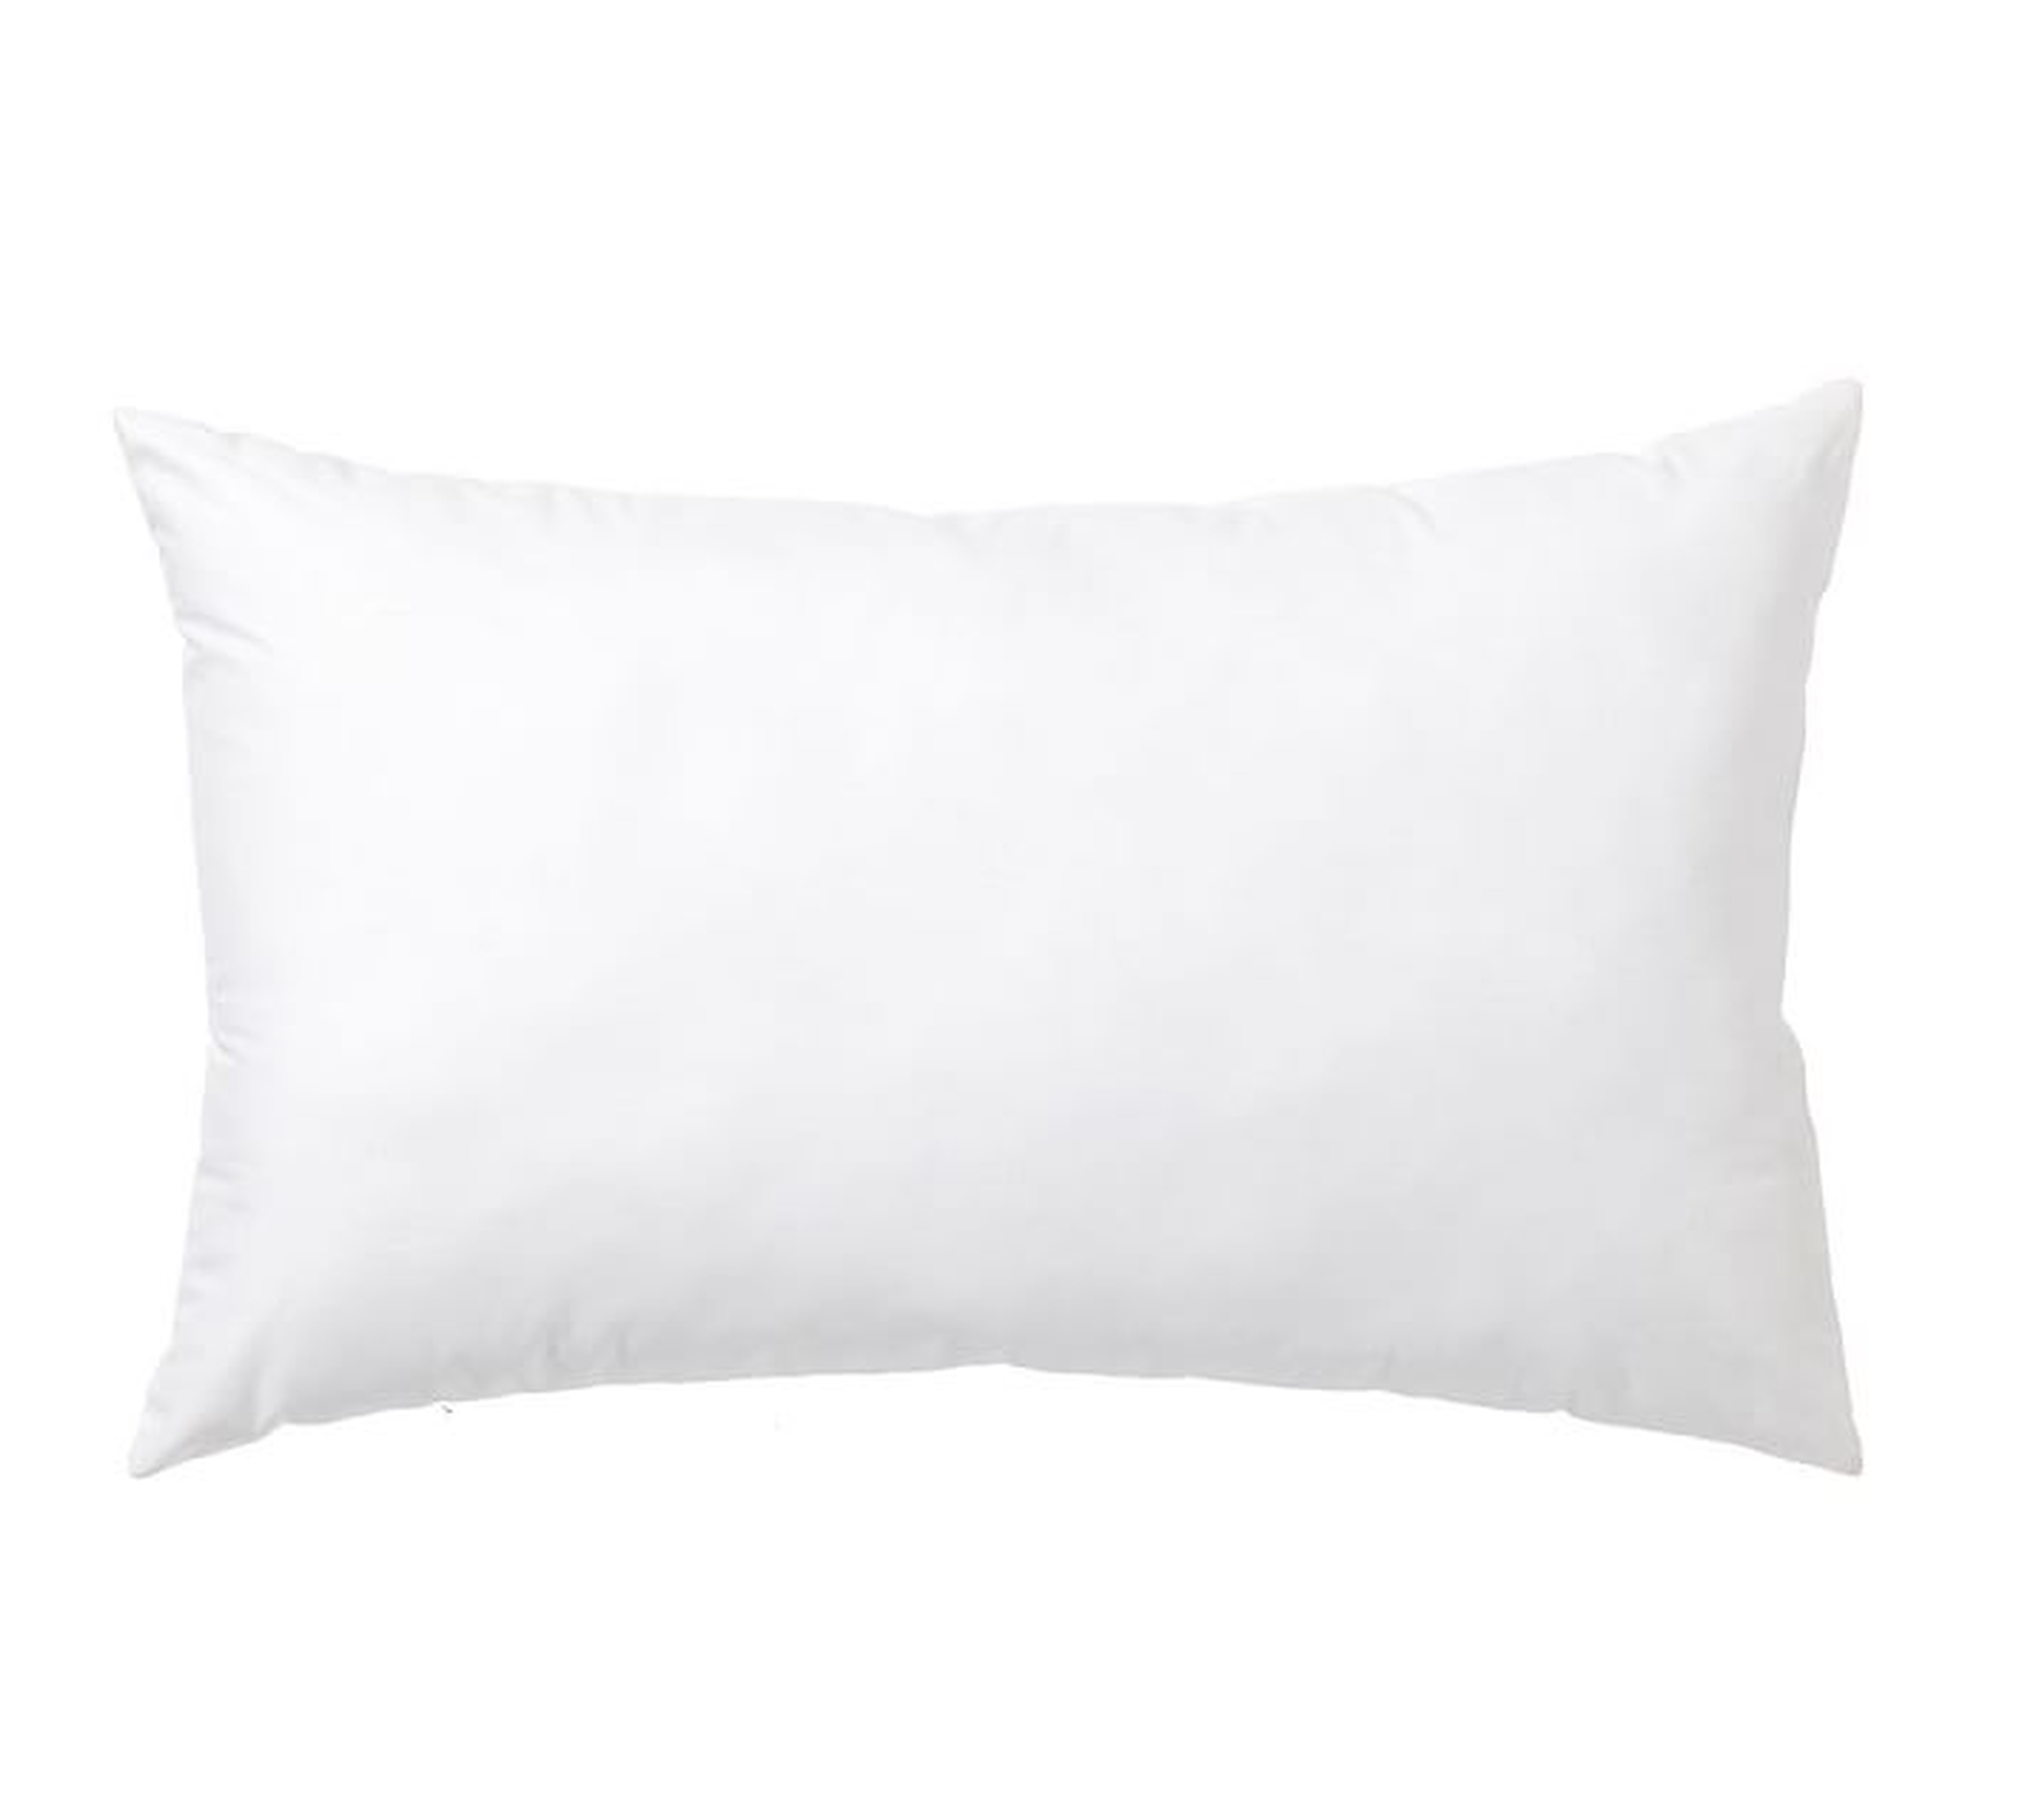 SYNTHETIC PILLOW INSERT - 16"x26" - Pottery Barn